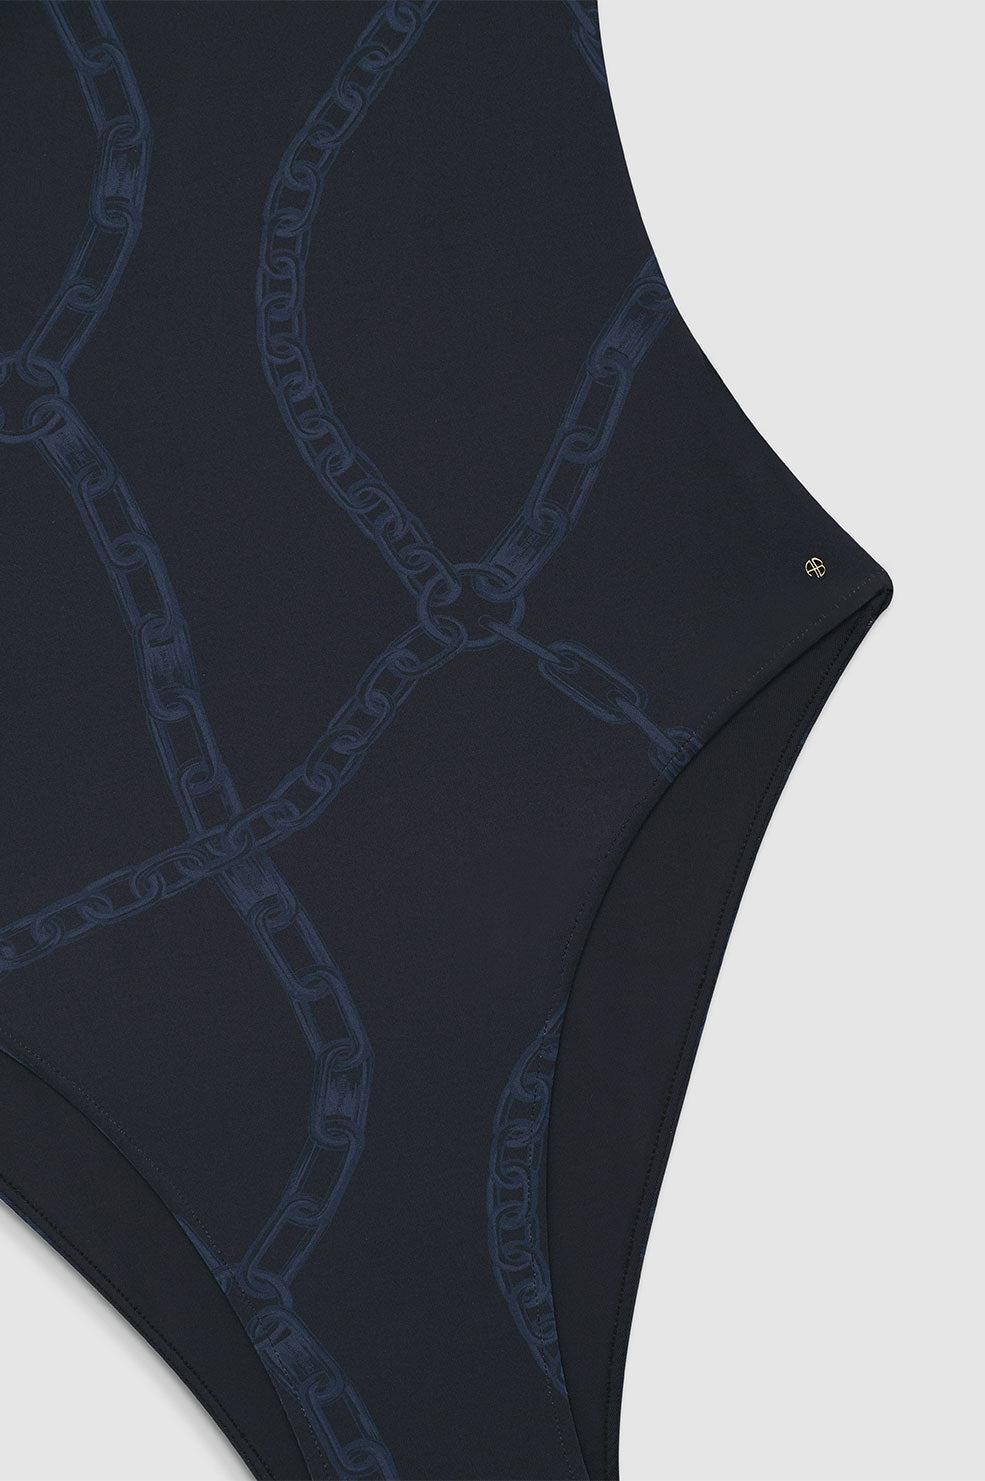 ANINE BING Jace One Piece - Navy Link Print - Detail View